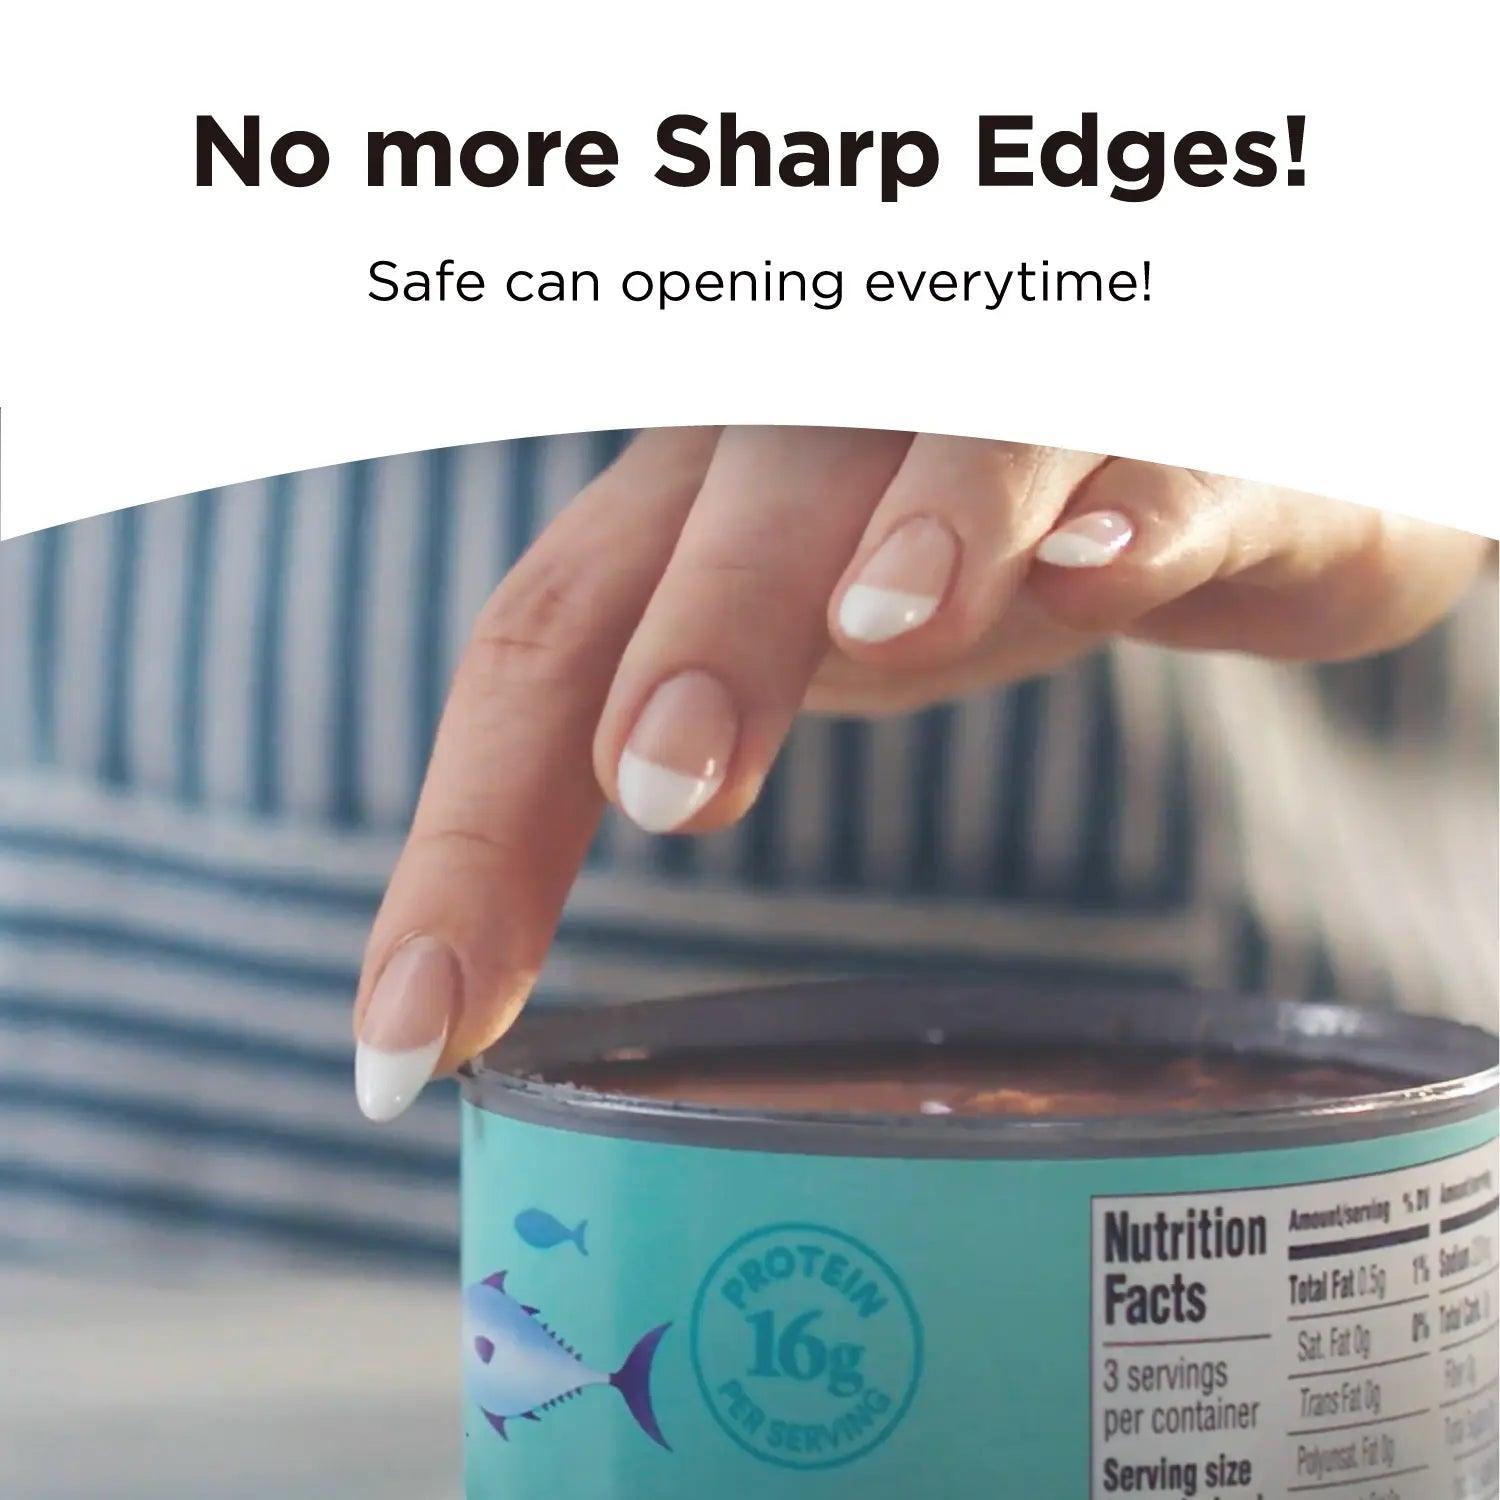 Smooth Edge Safe Cut Can Opener - No Sharp Edges or Cuts